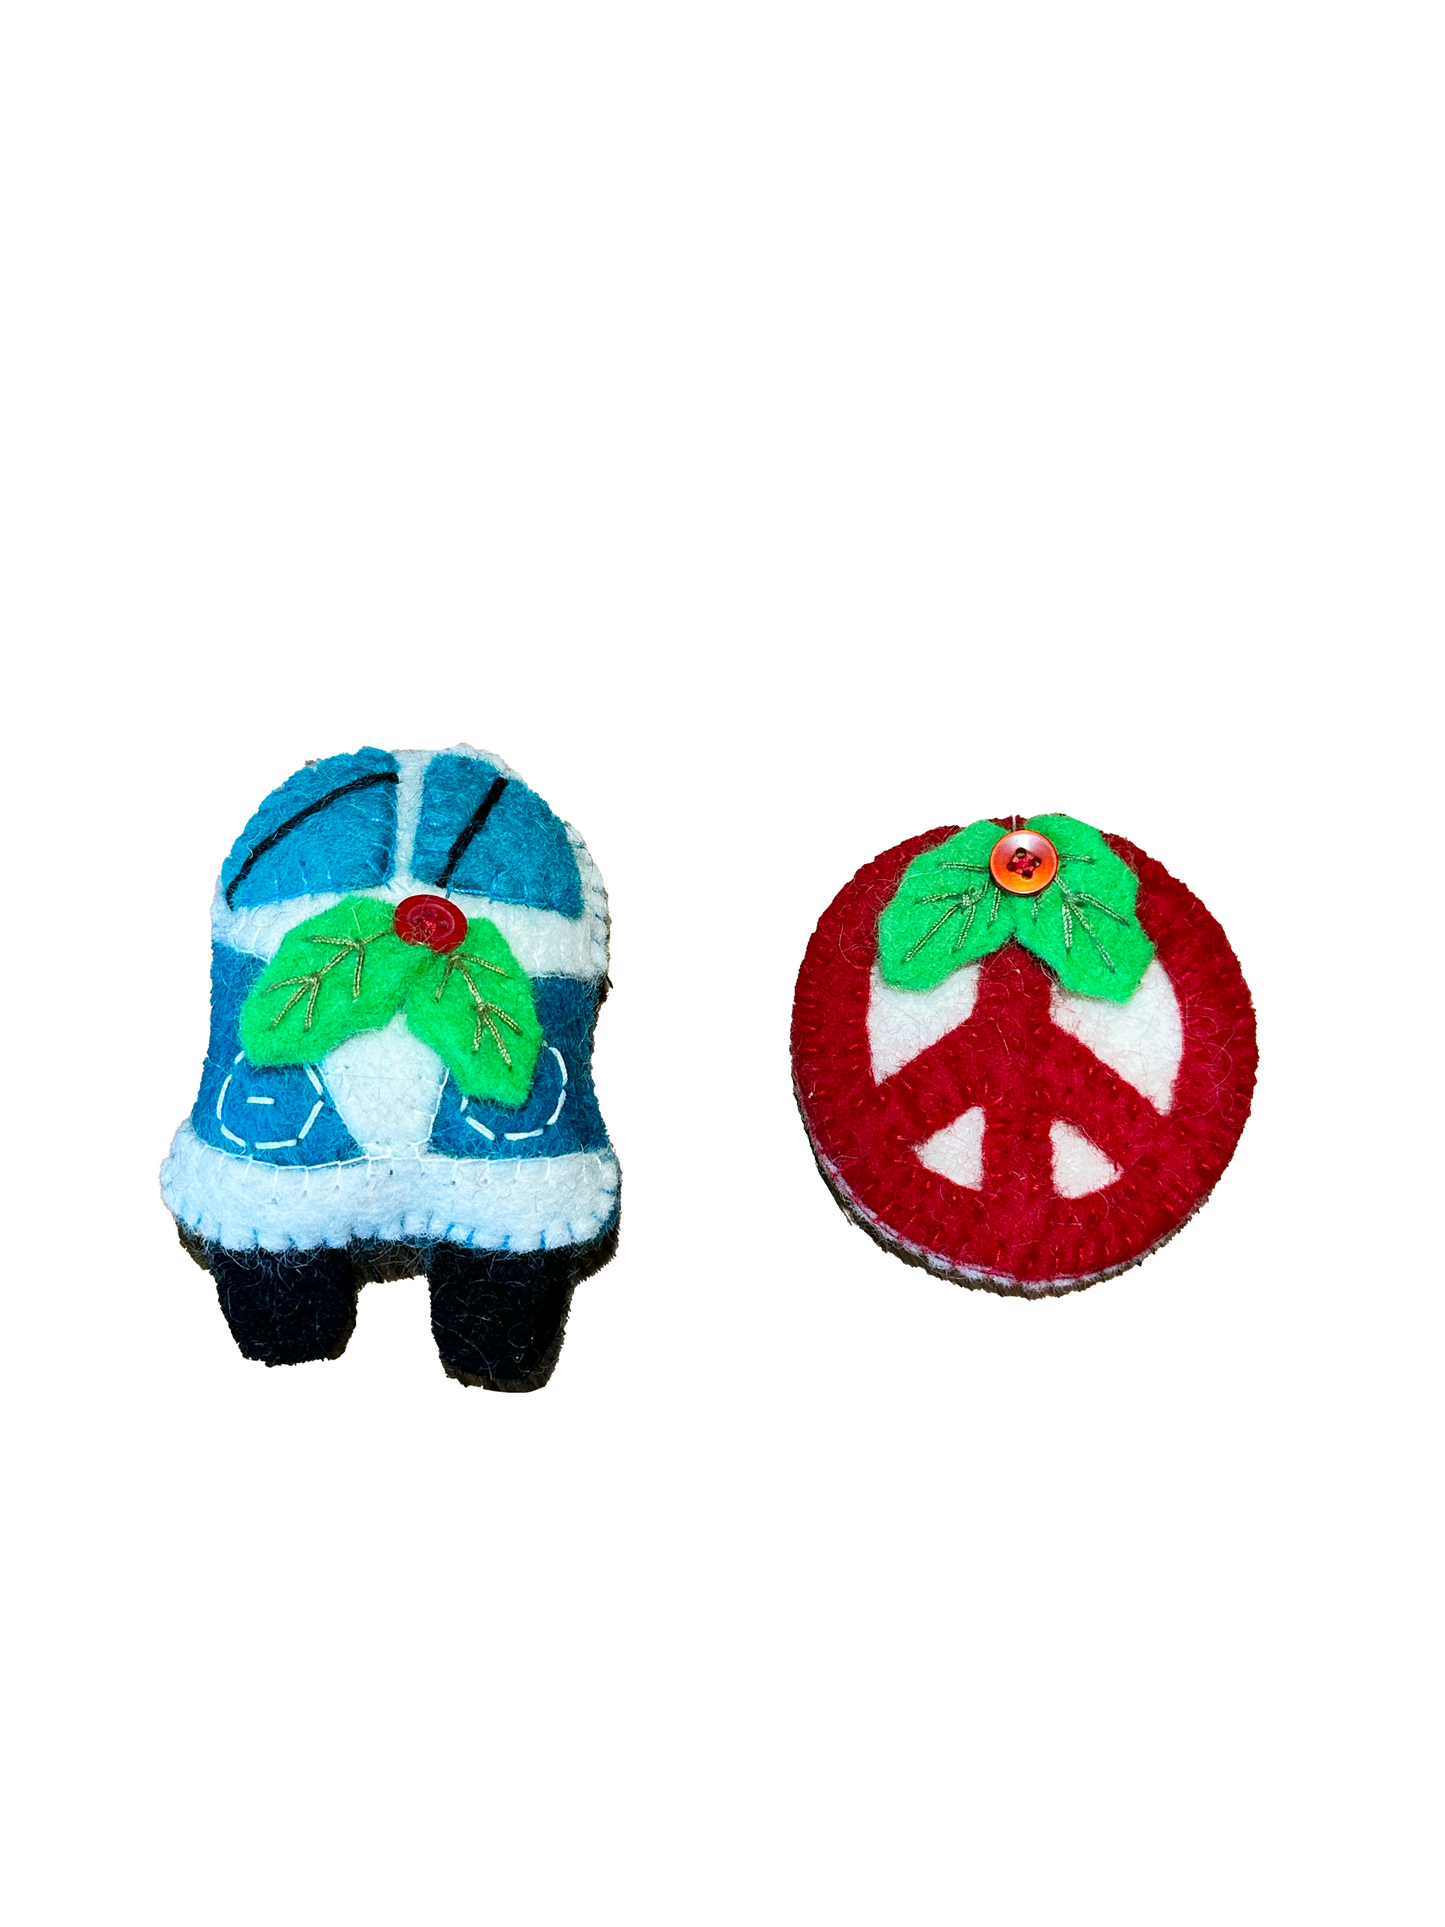 Hippie VW Bus and Peace Sign Ornament-- Set of 2